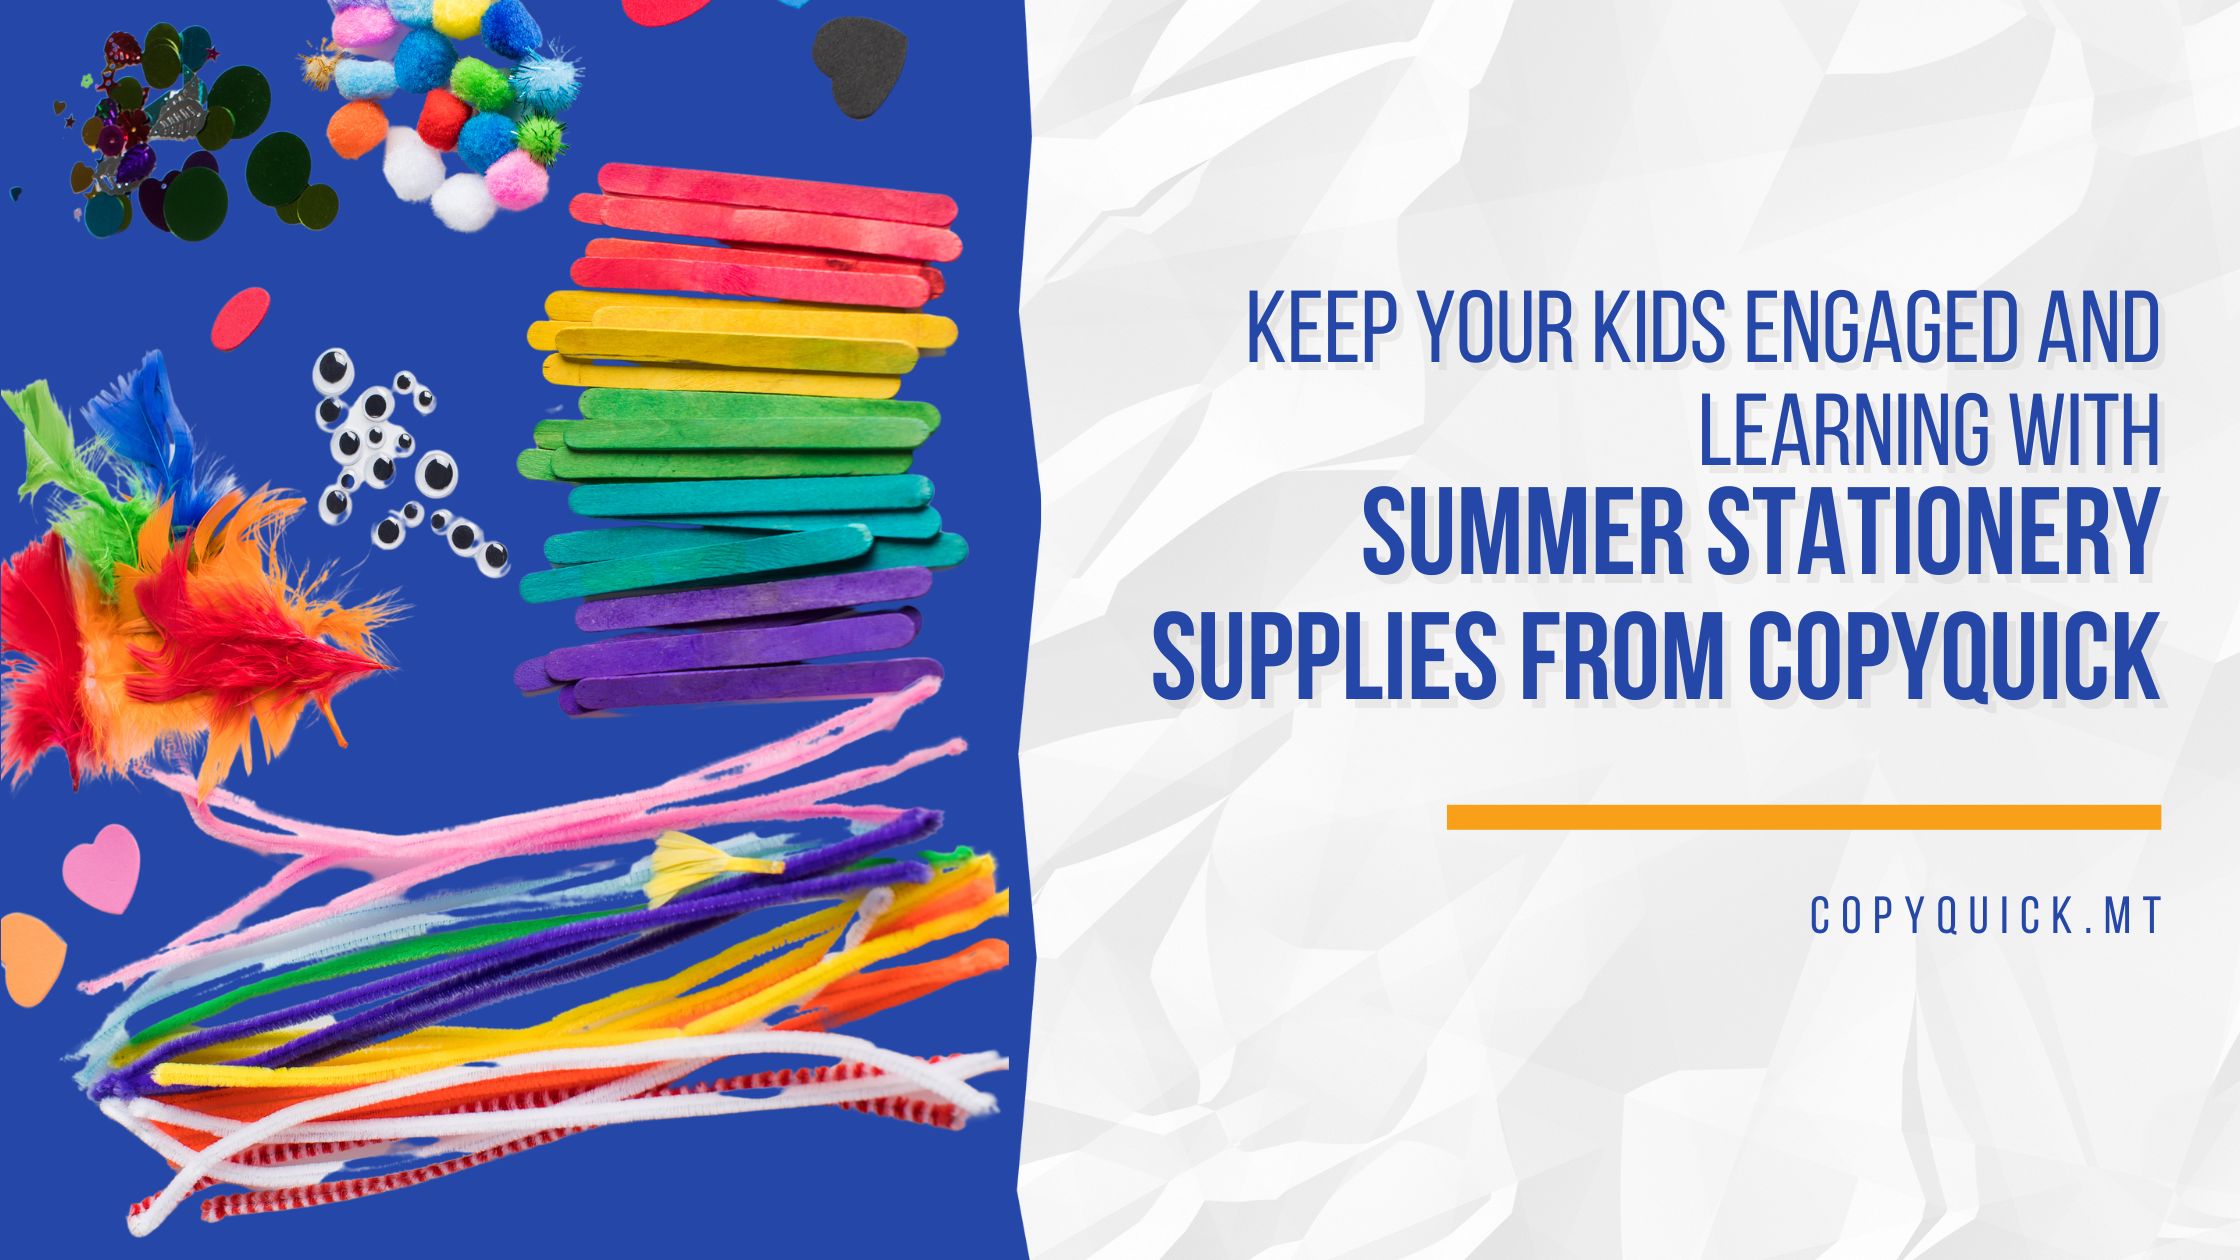 Summer Stationery Supplies from Copyquick